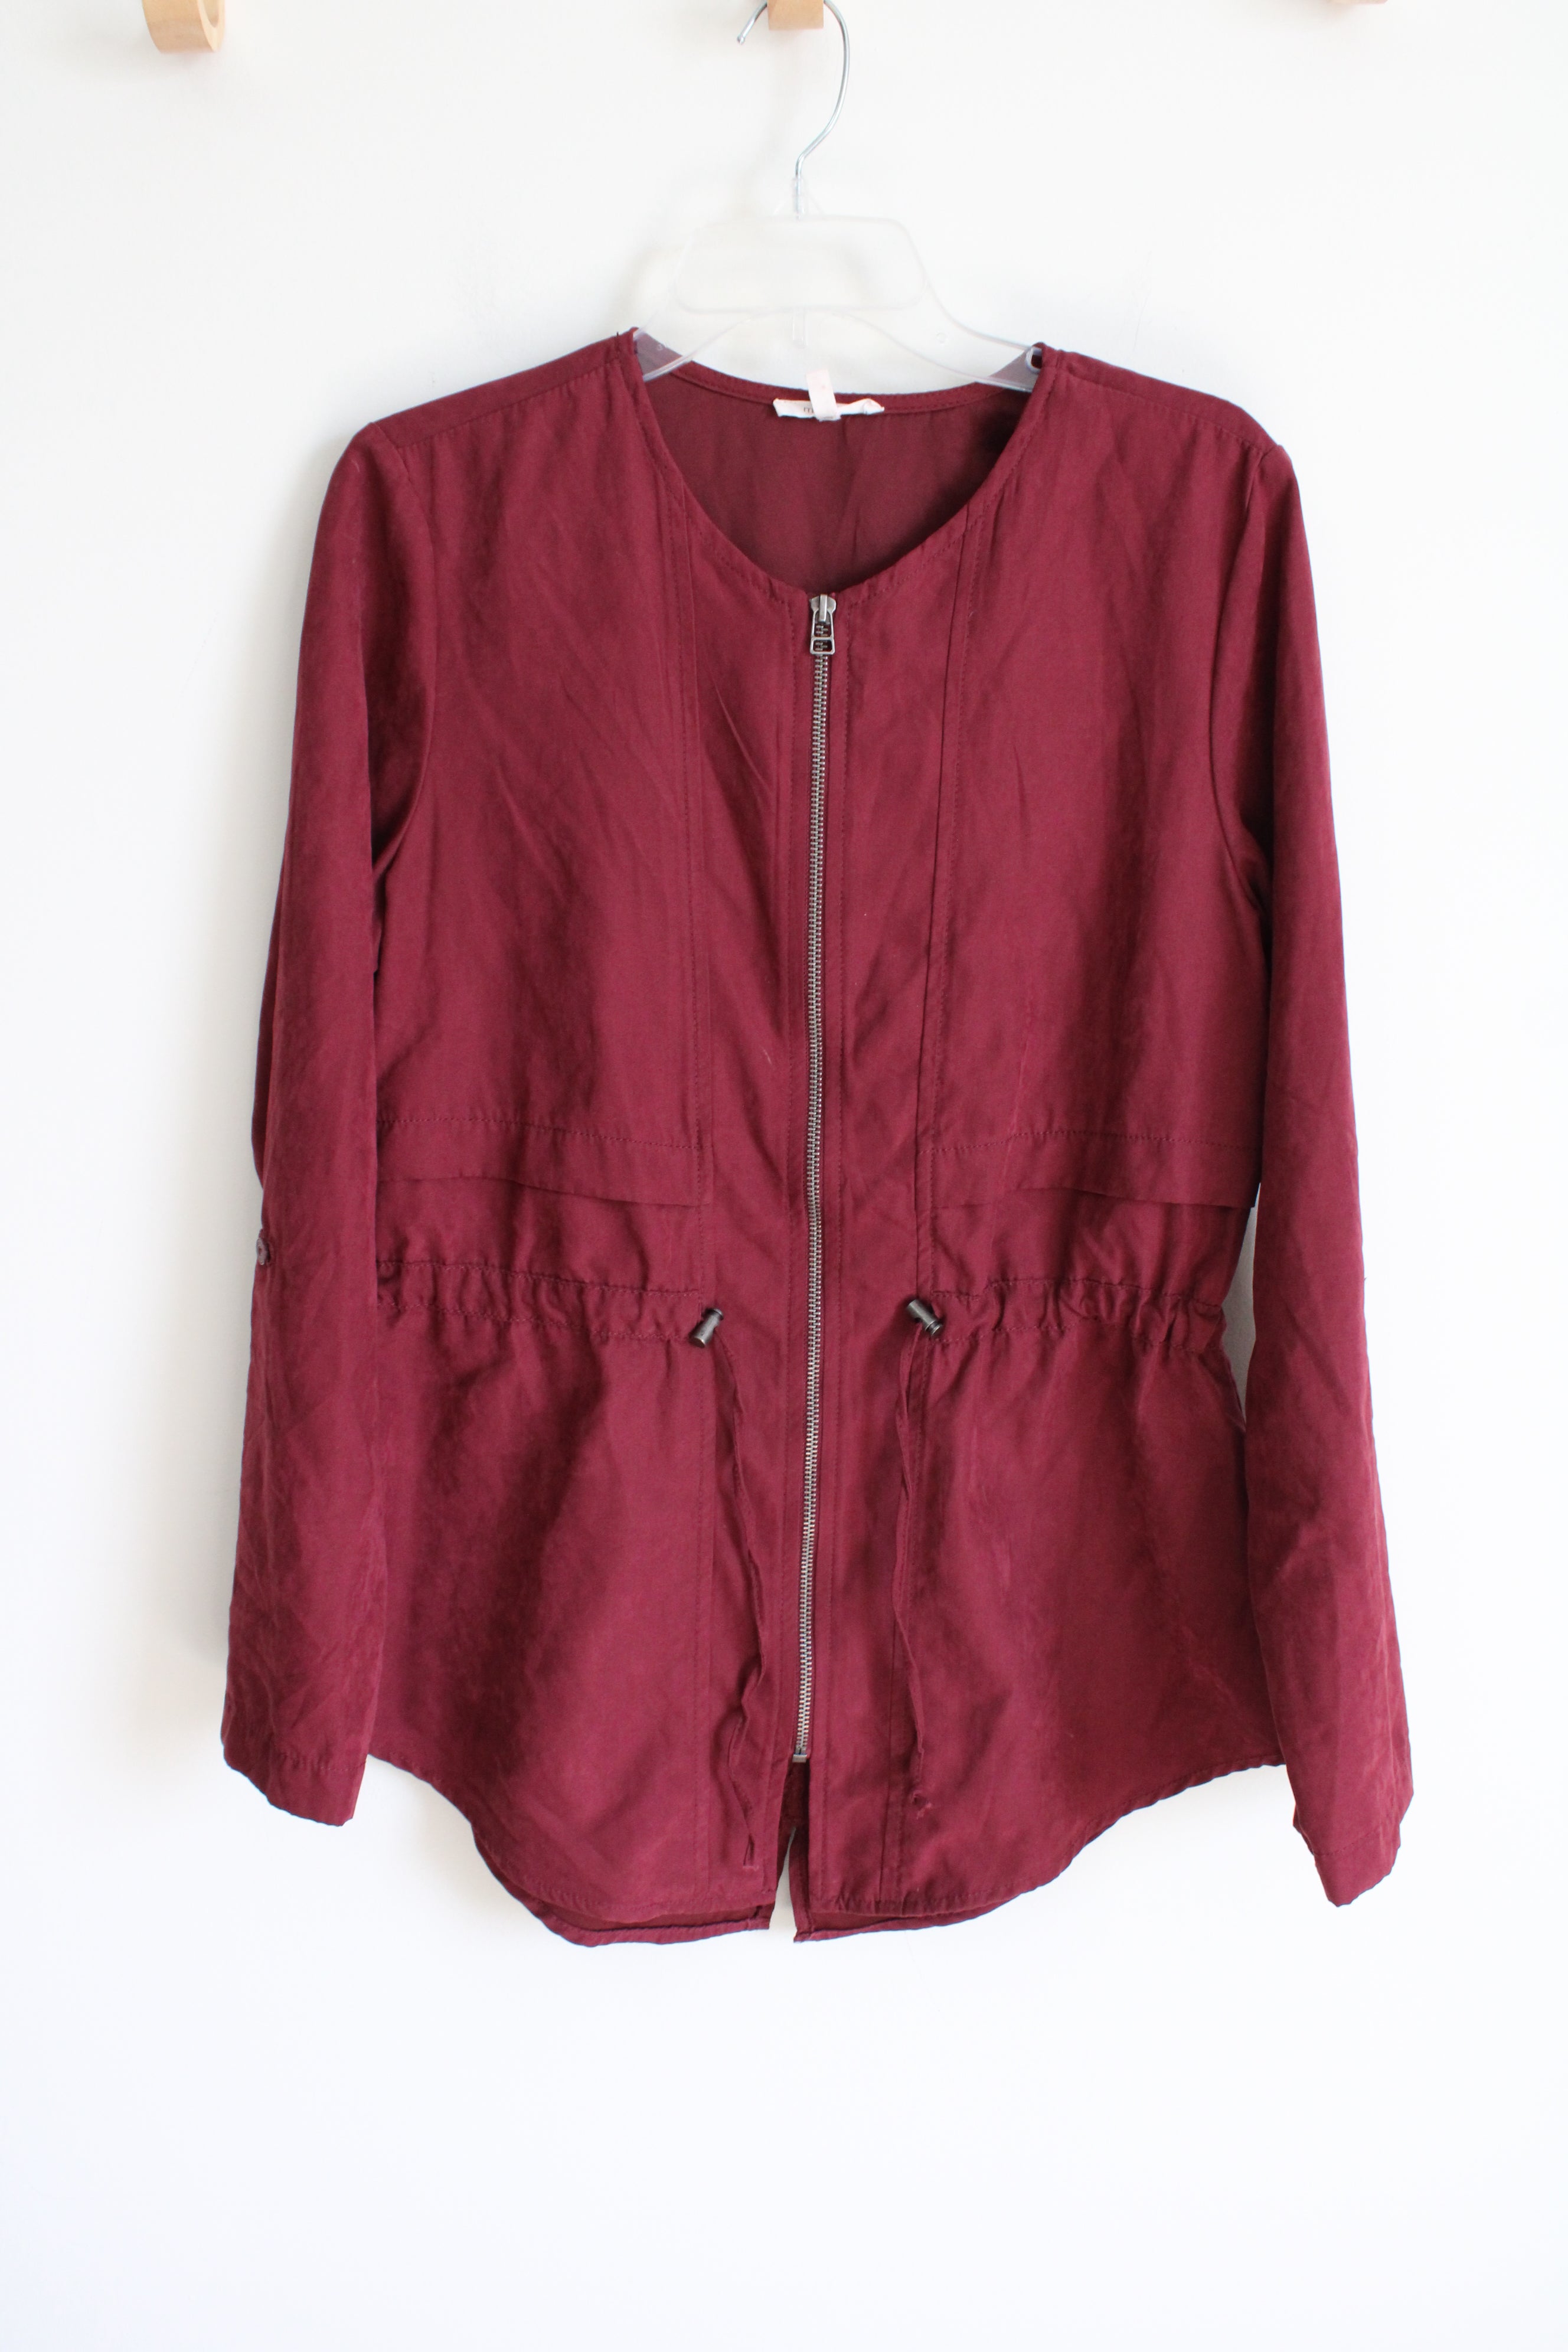 Maurices Maroon Sueded Jacket | M